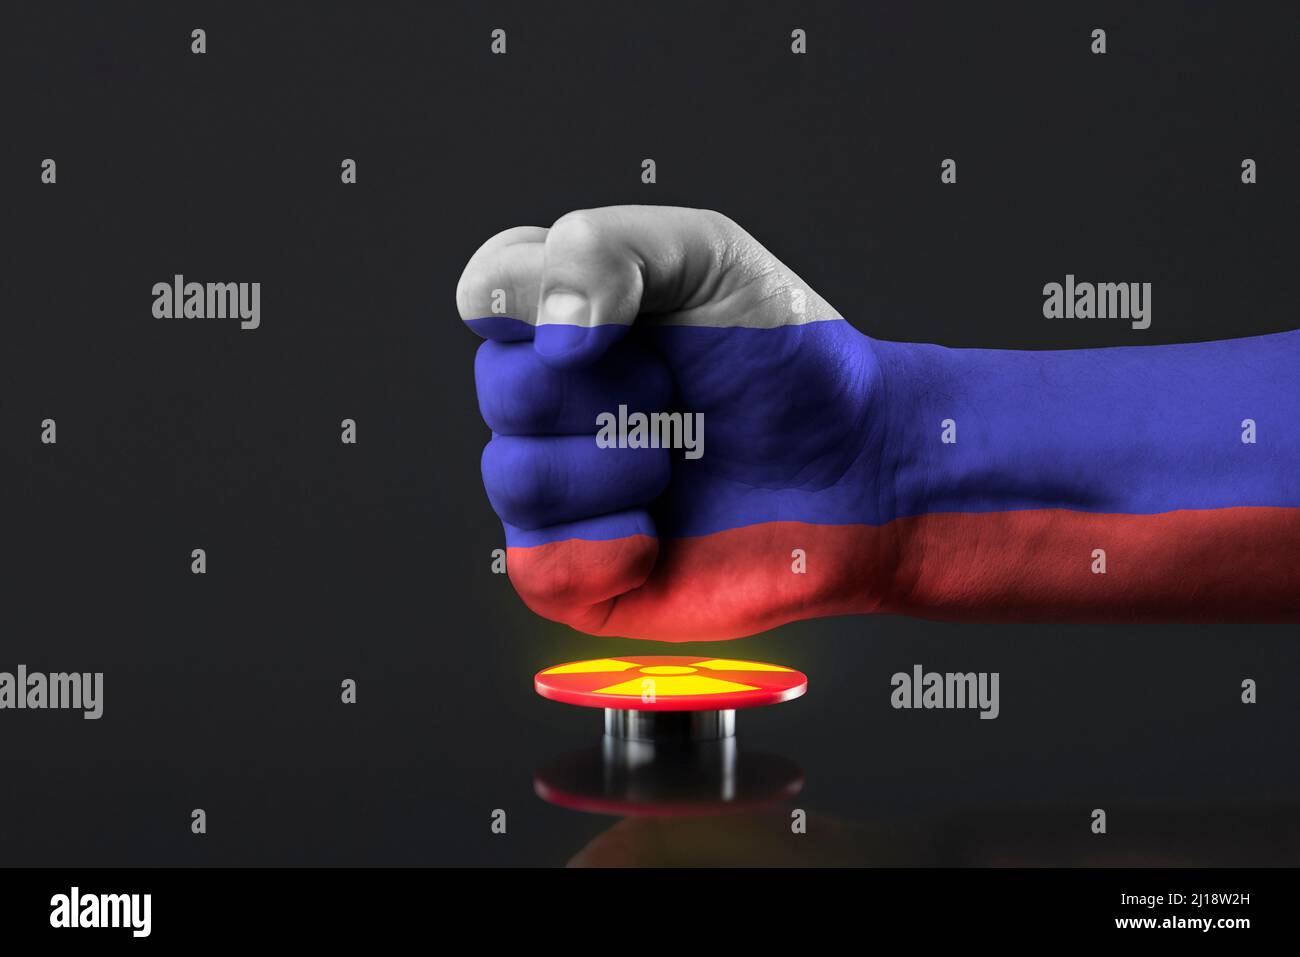 The threat of nuclear war. Russia threatens the world with nuclear weapons. A fist painted in the colors of the Russian flag presses a large red Stock Photo